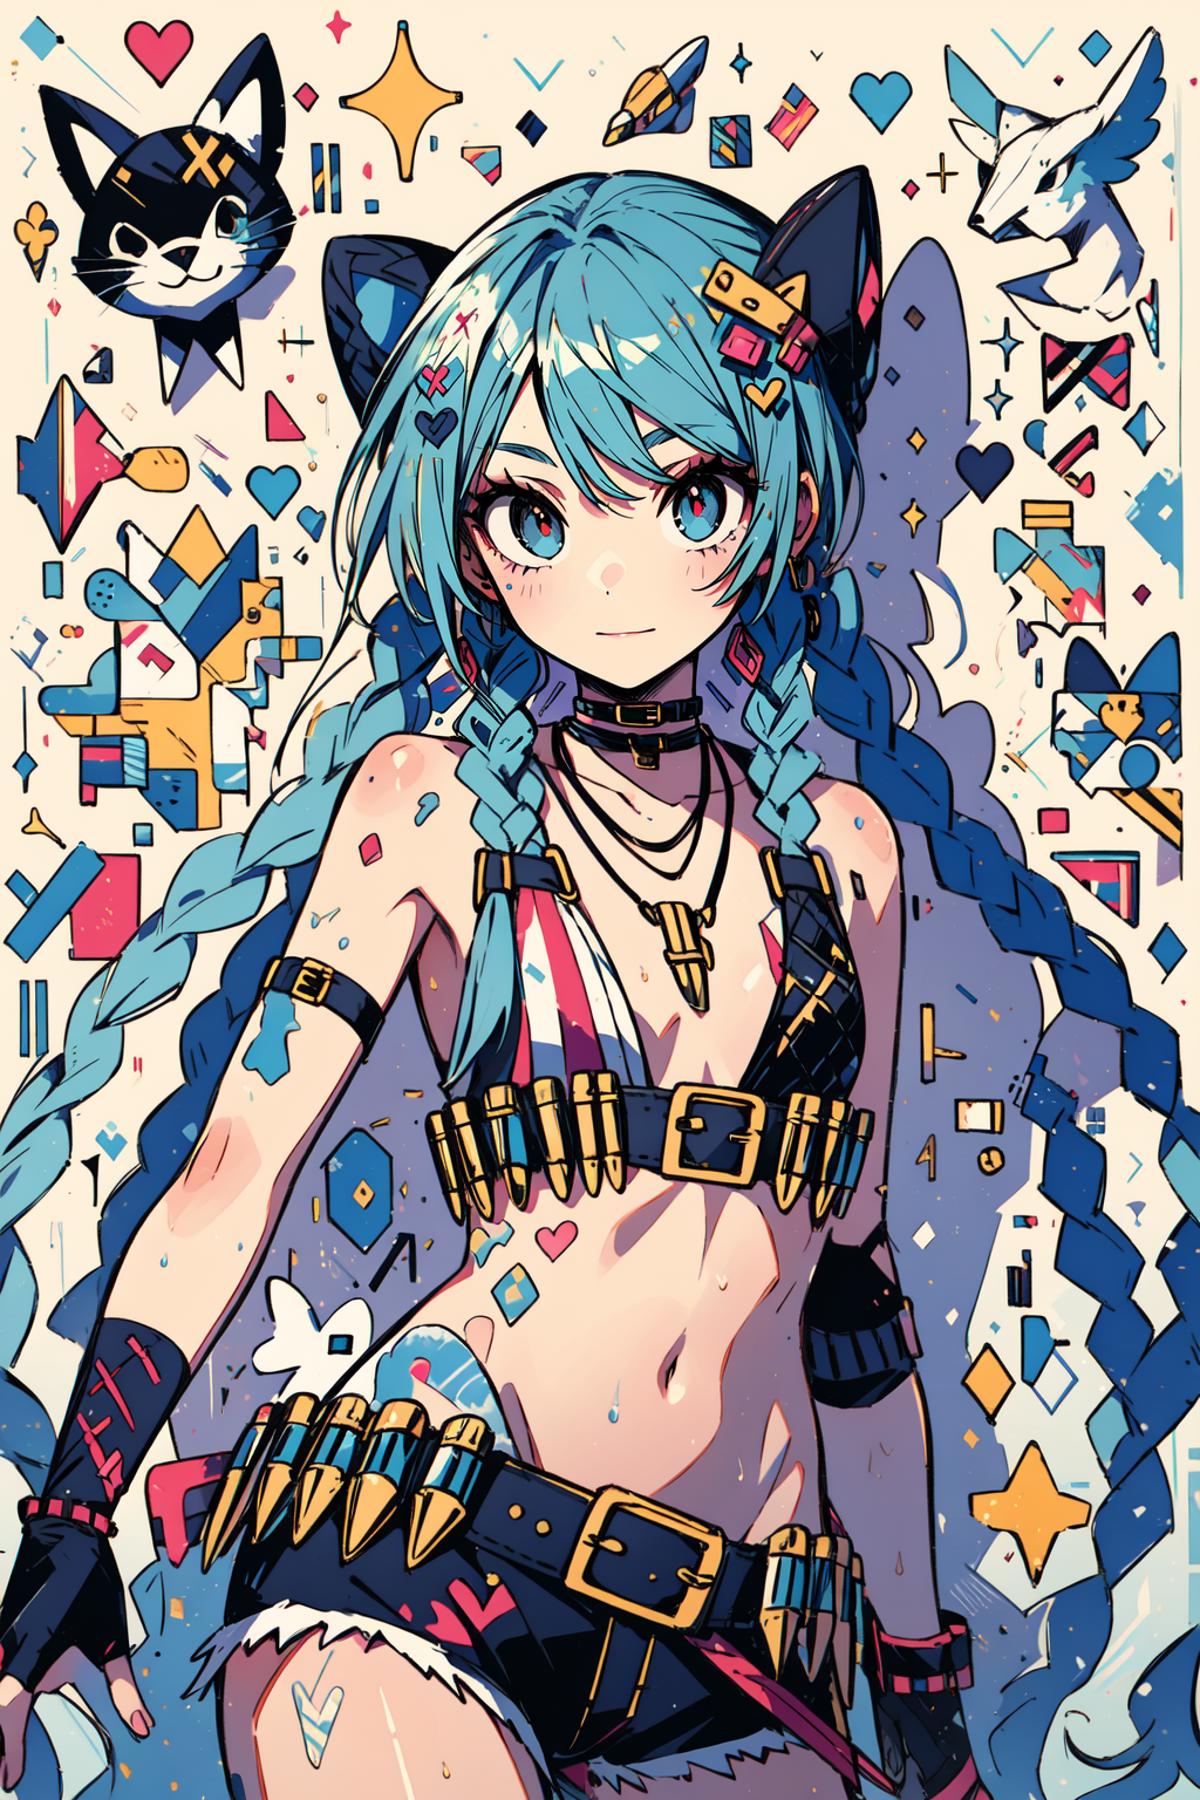 Anime girl with blue hair and a black and gold corset.